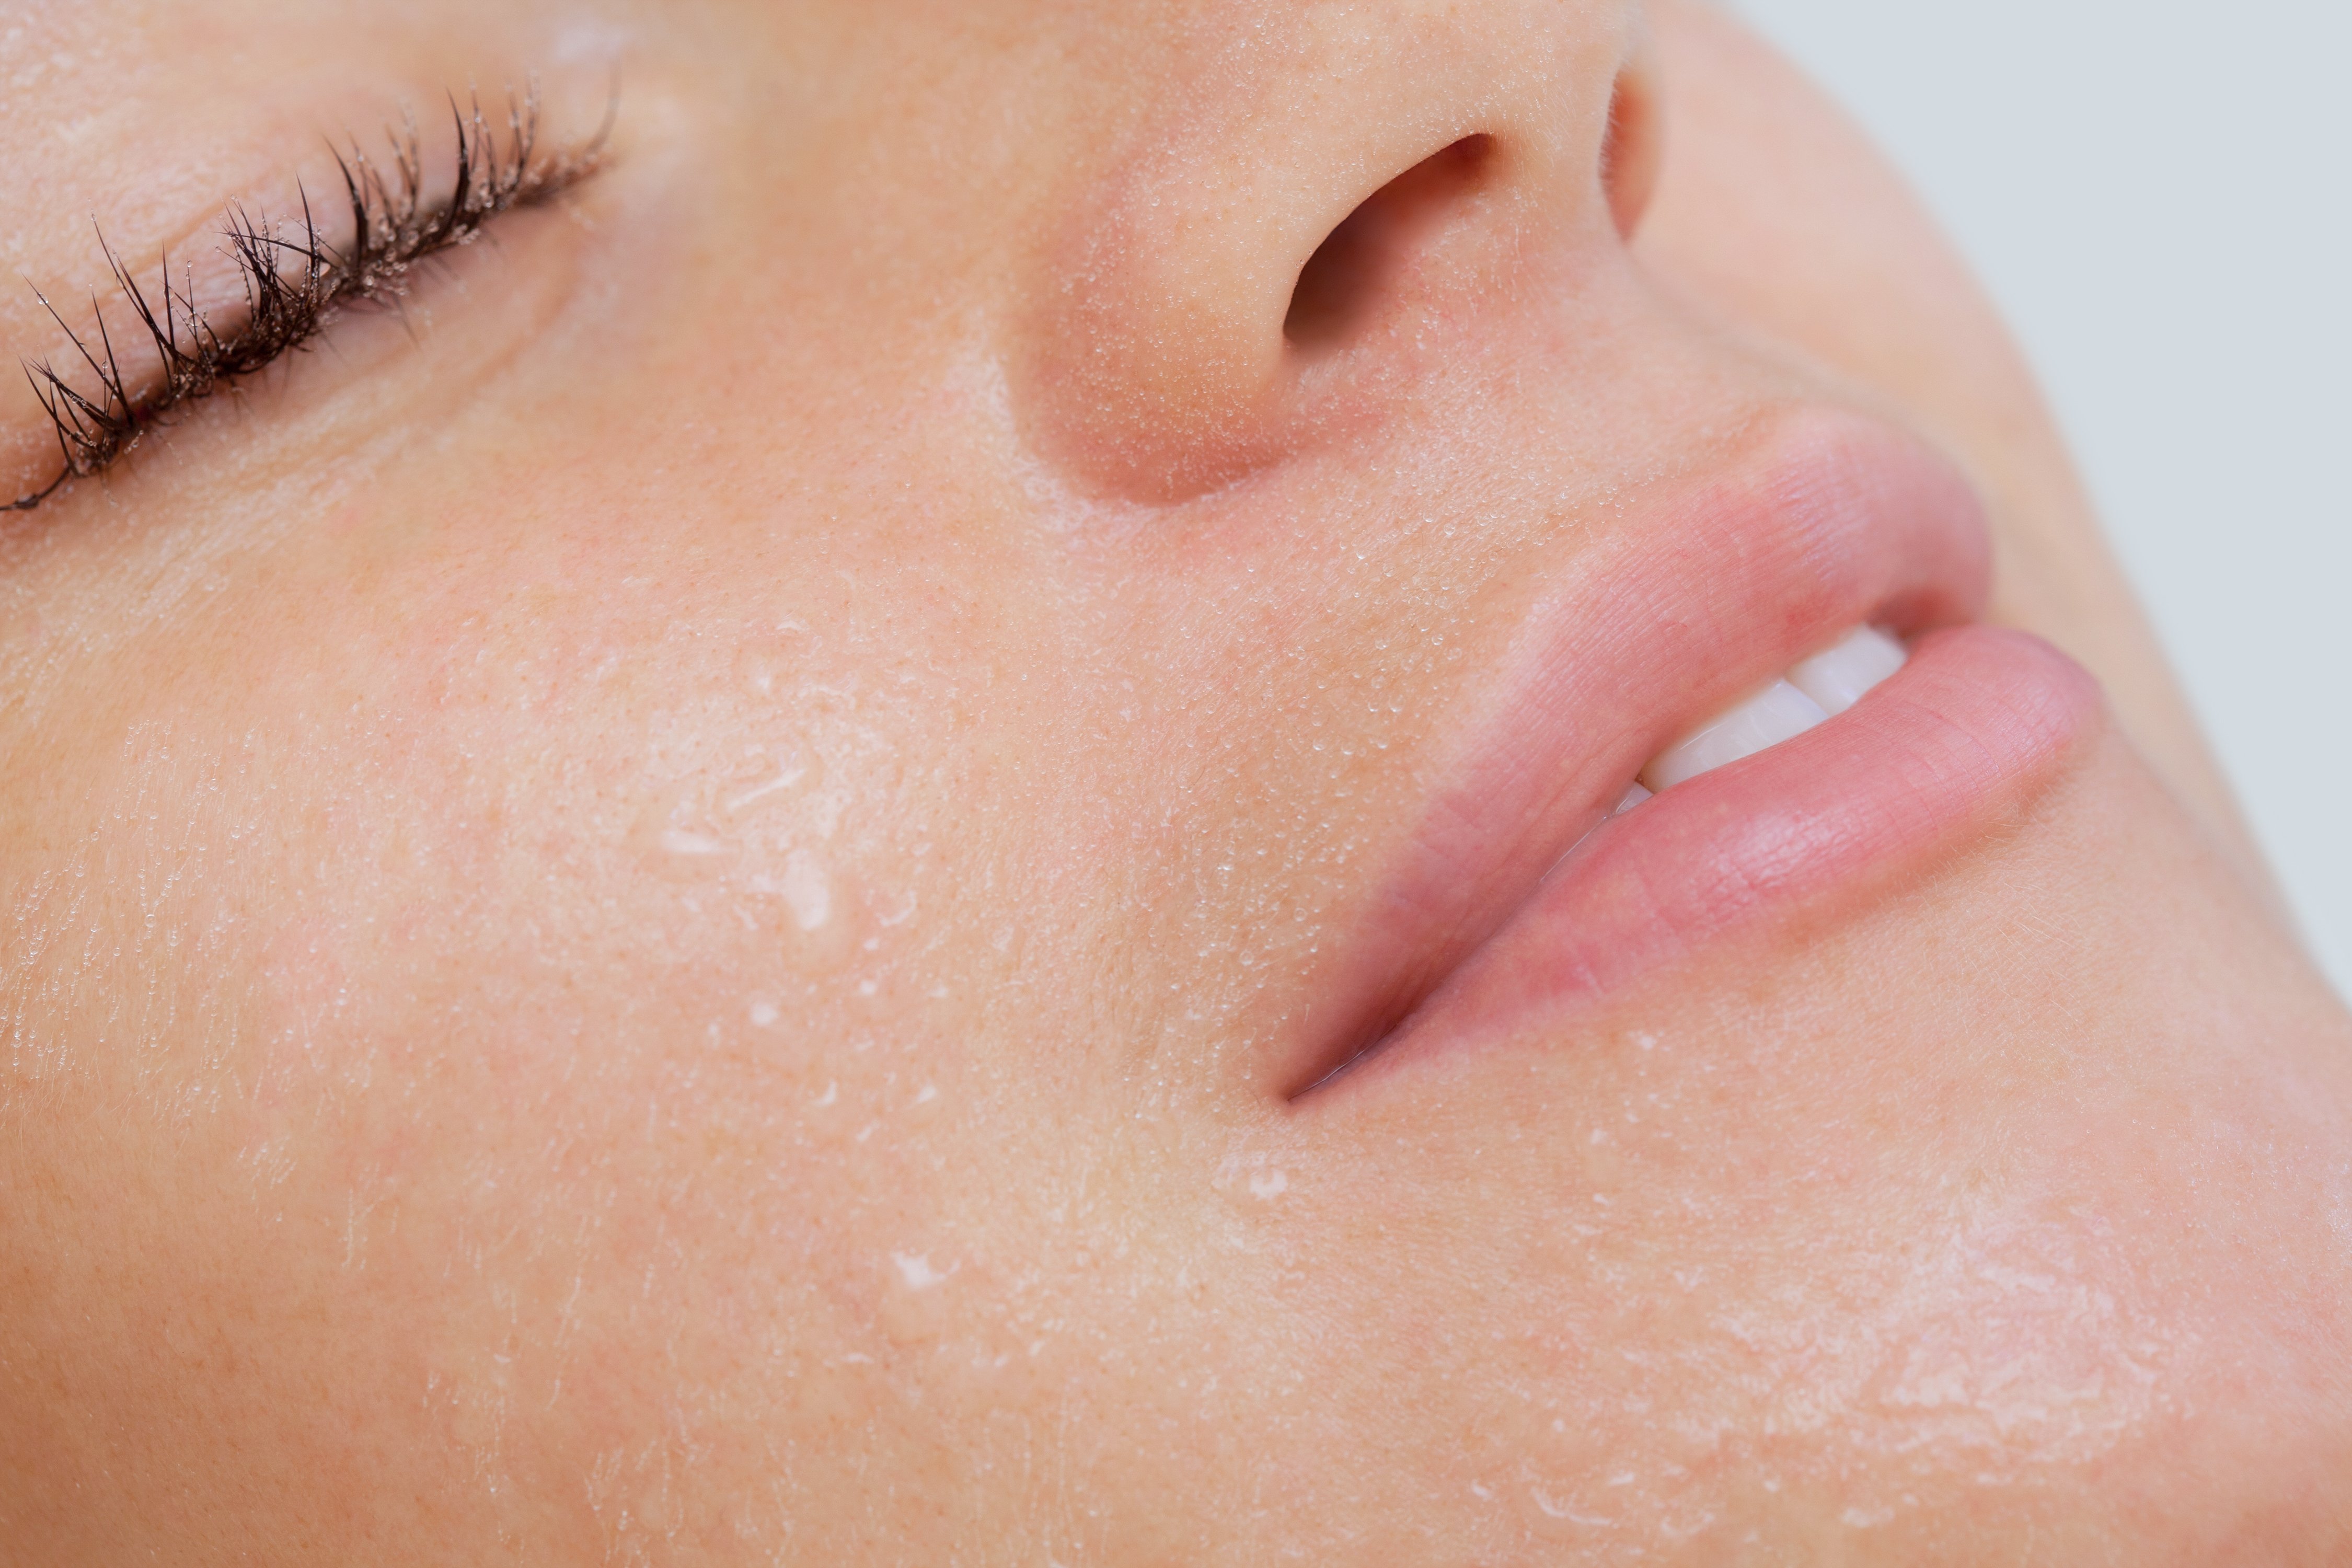 Skin after facial steaming | Source: Getty Images